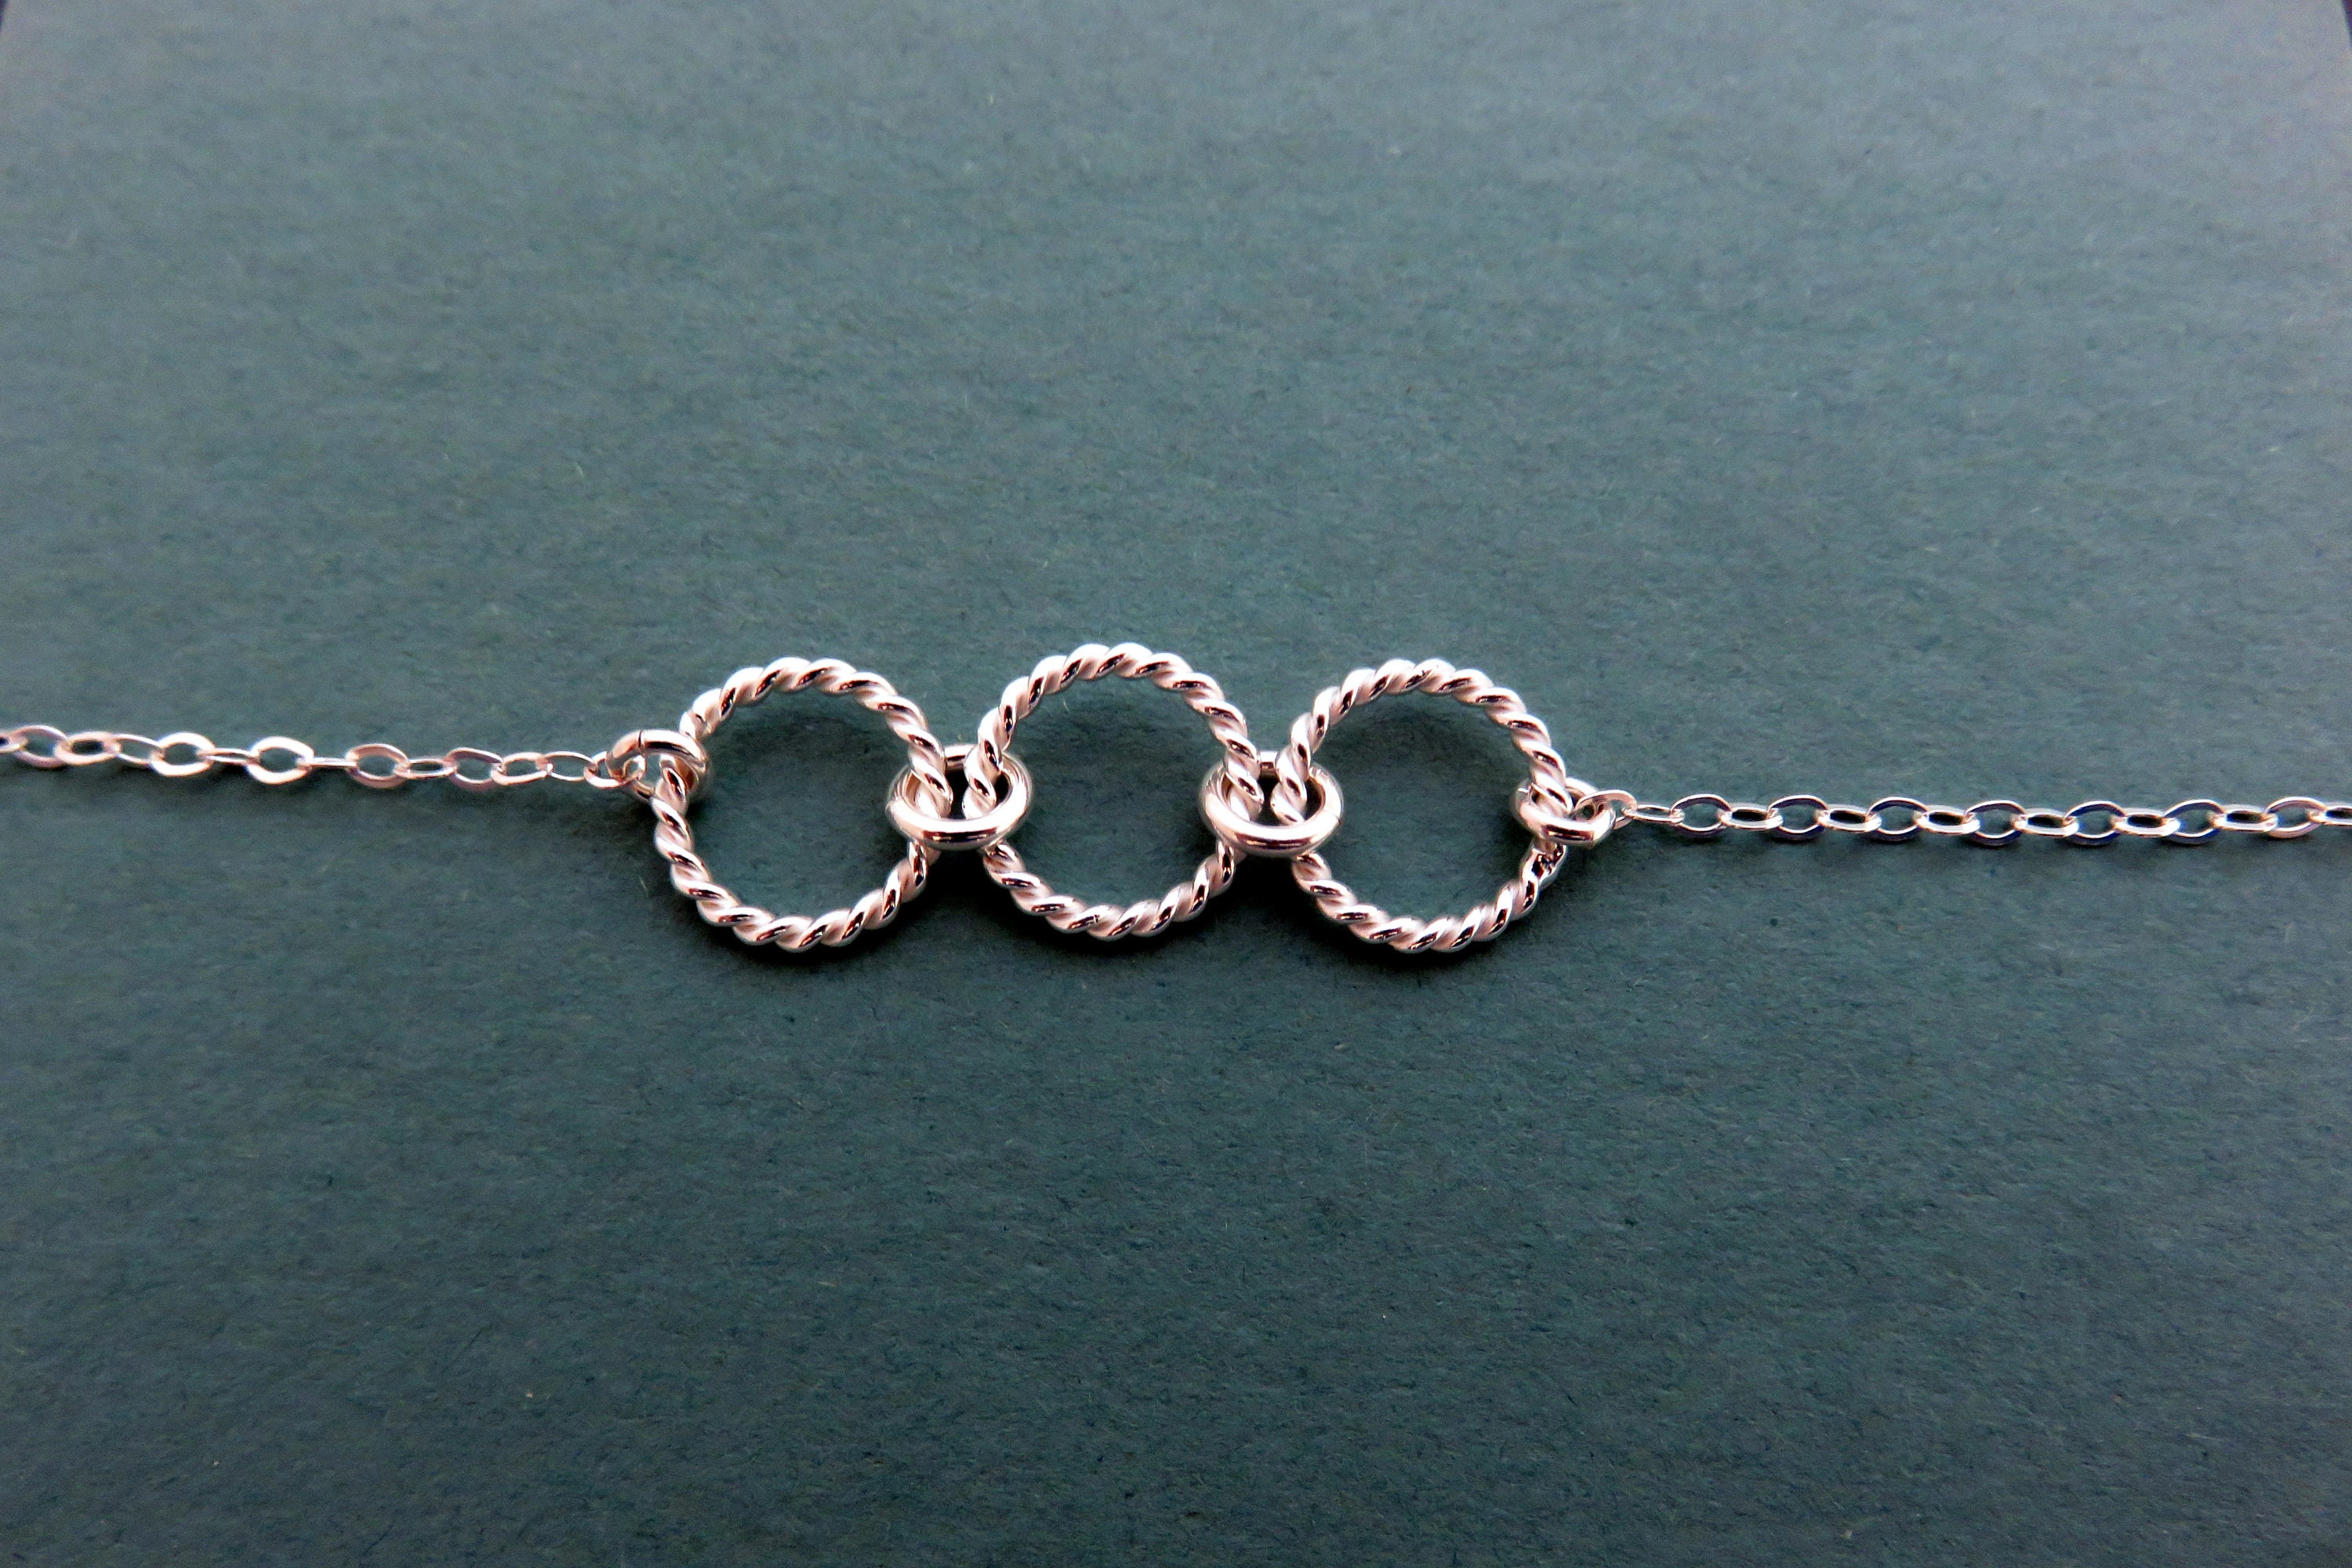 Chain Extender, Sterling Silver Extender, Removable Chain